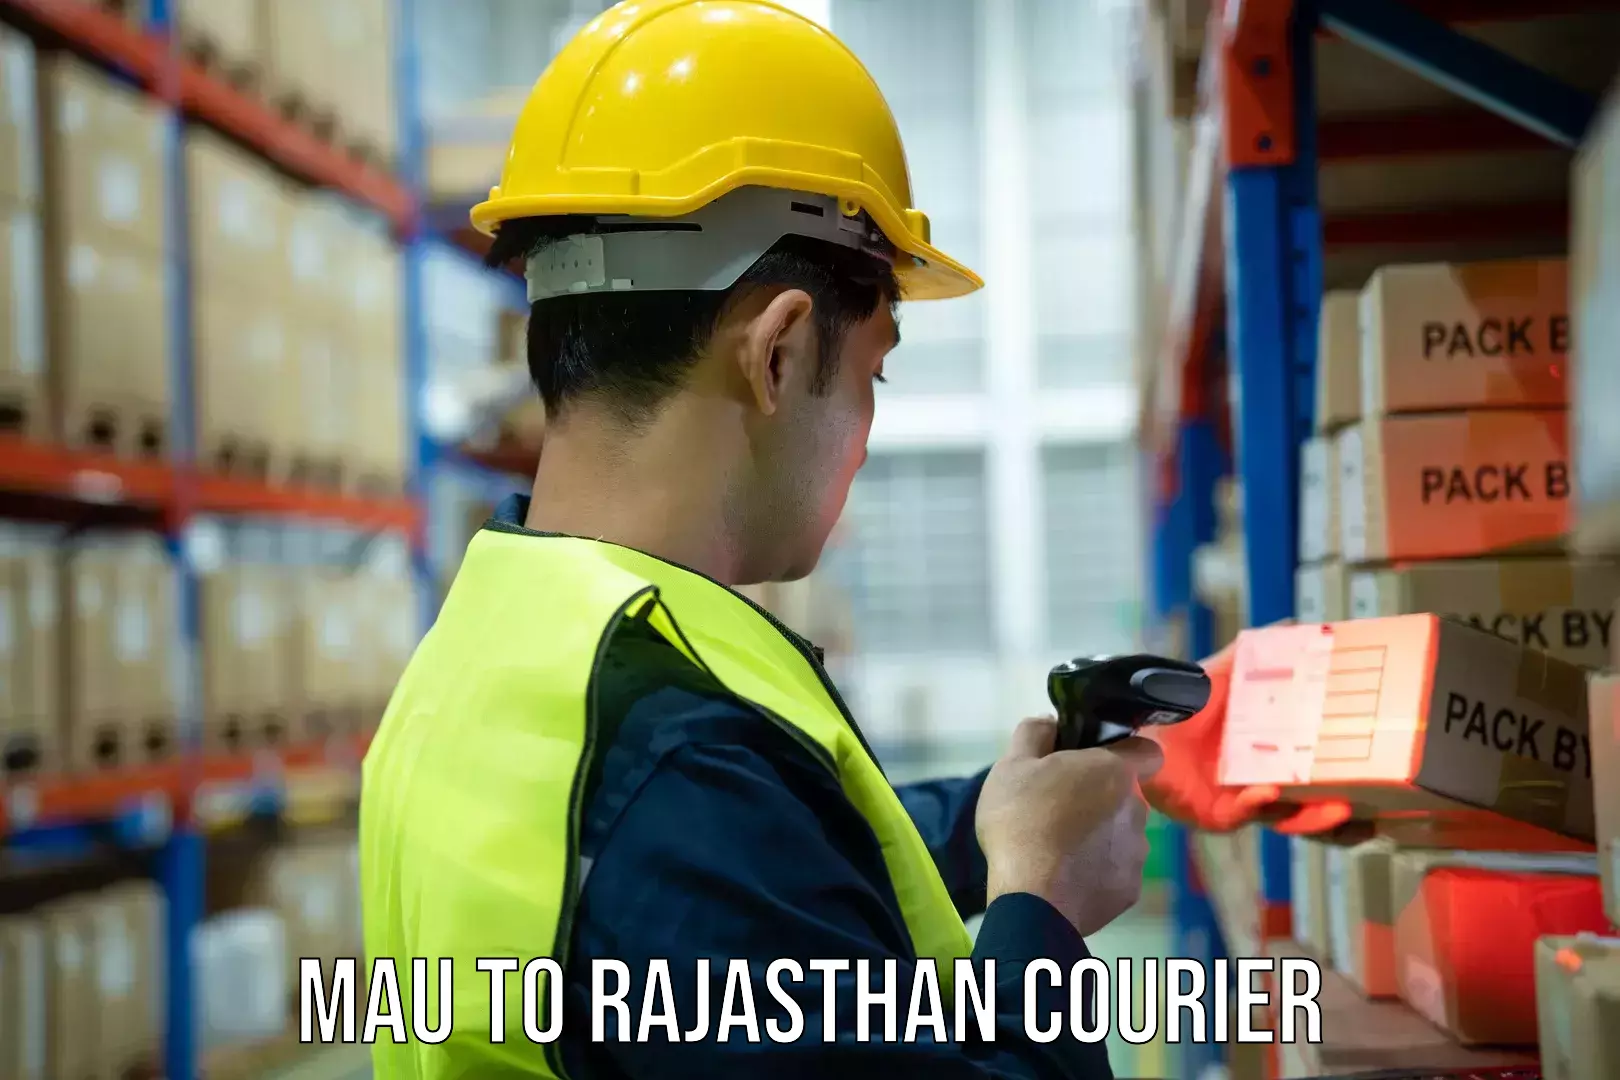 Professional courier handling Mau to Rajasthan